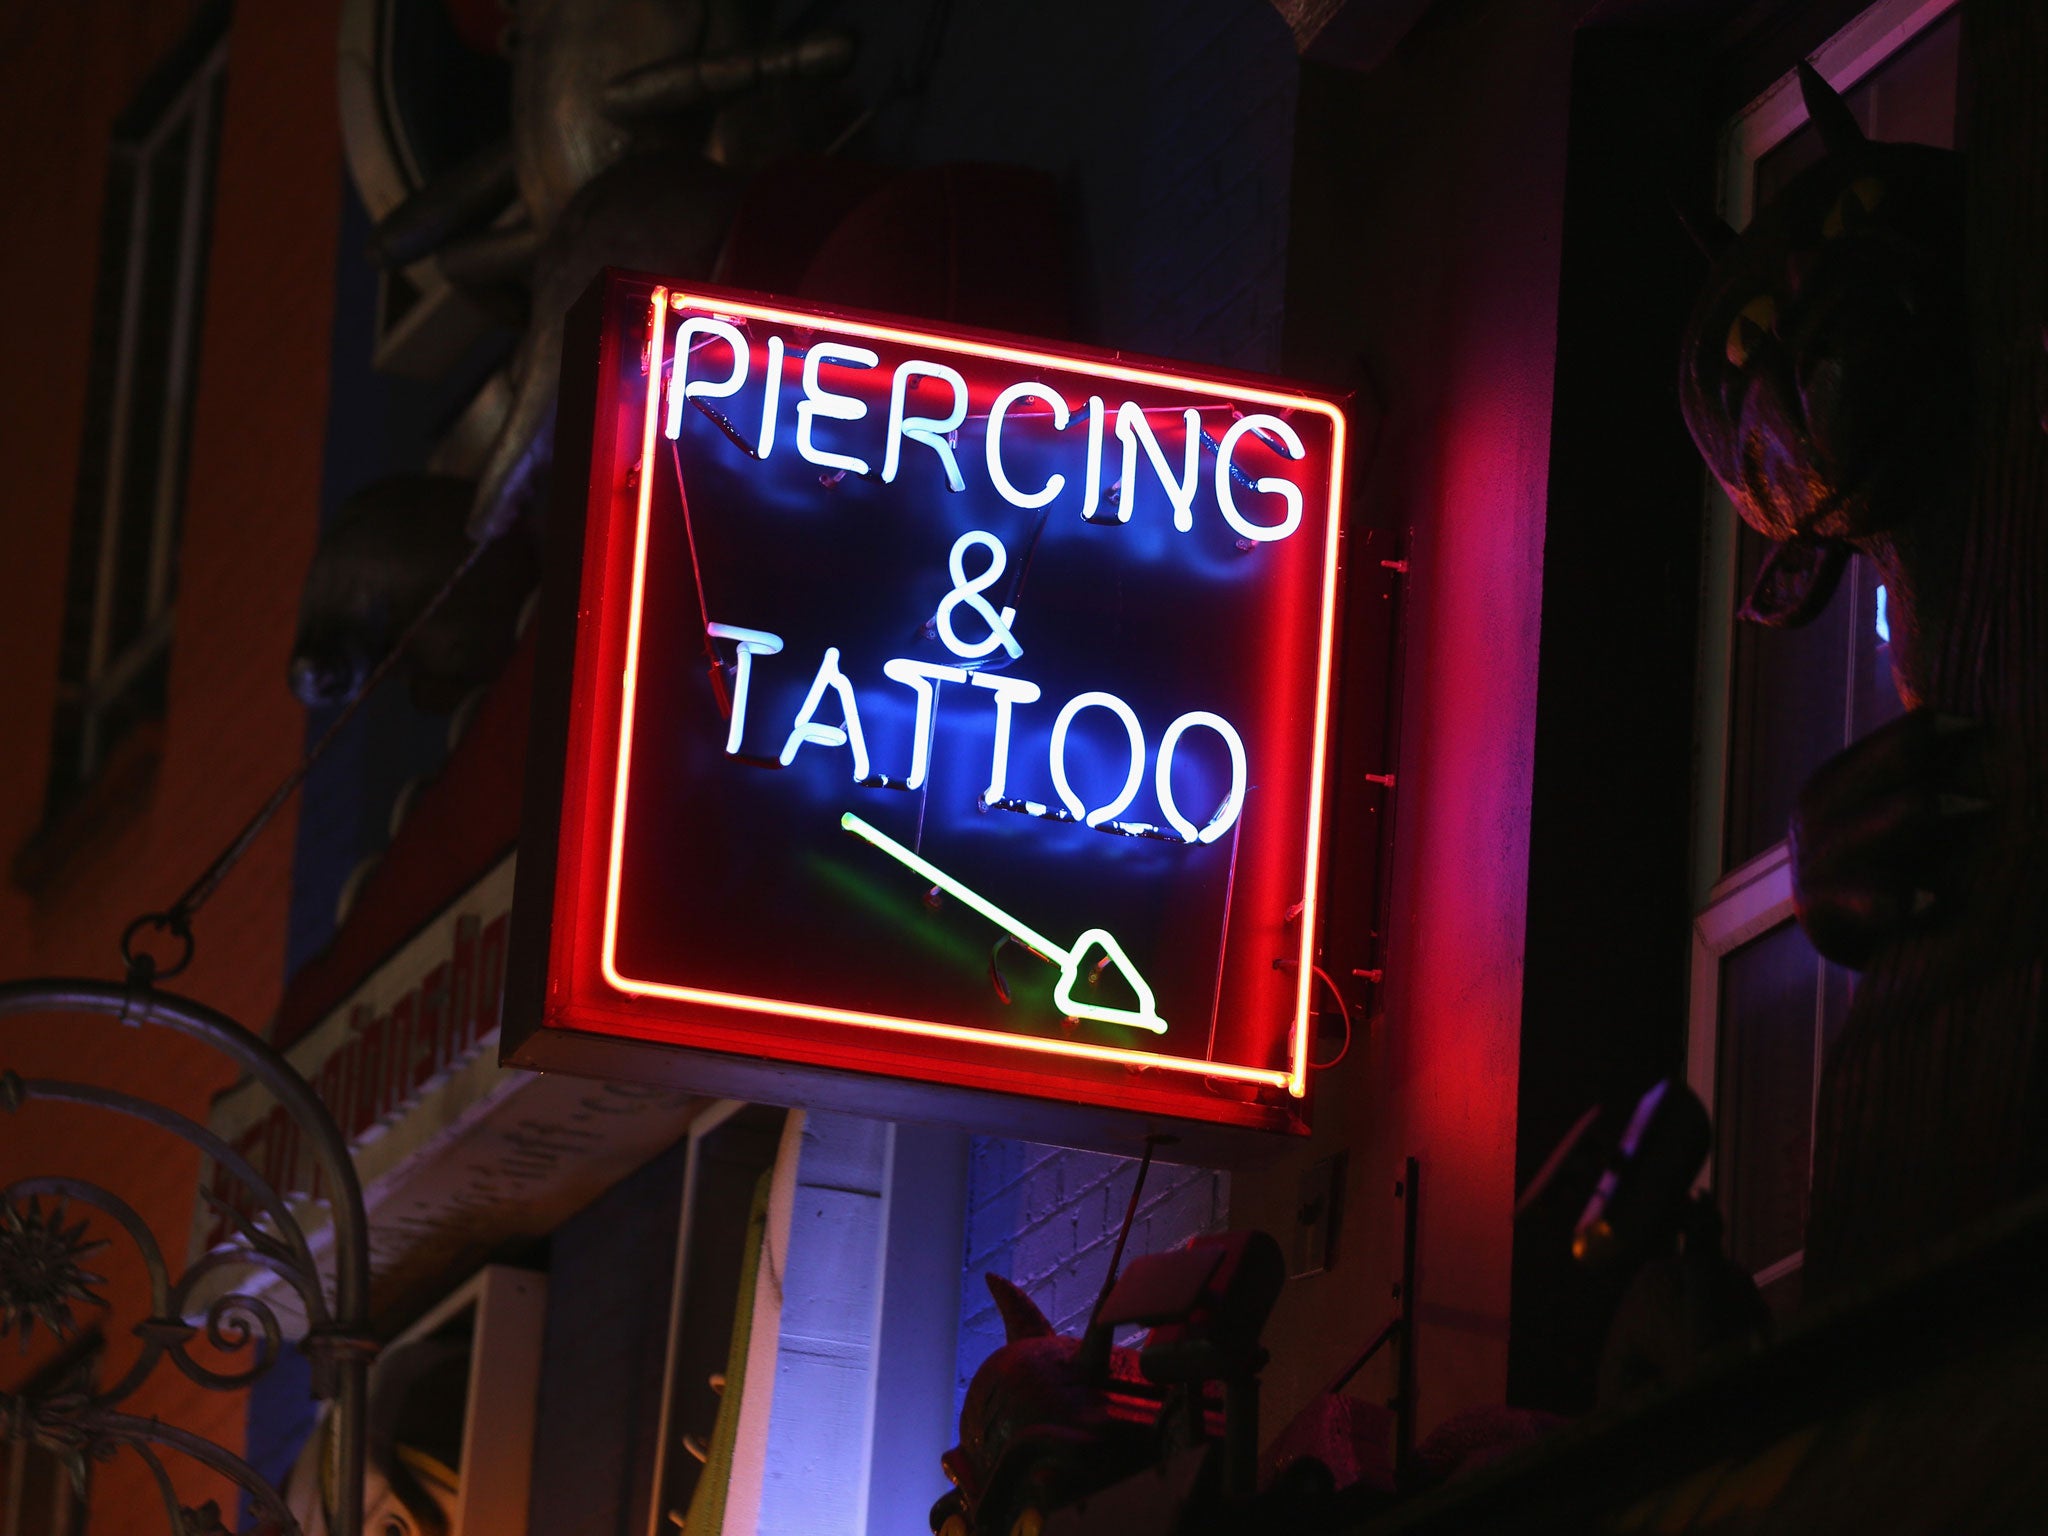 A sign advertises tattooing and piercing near Camden Market